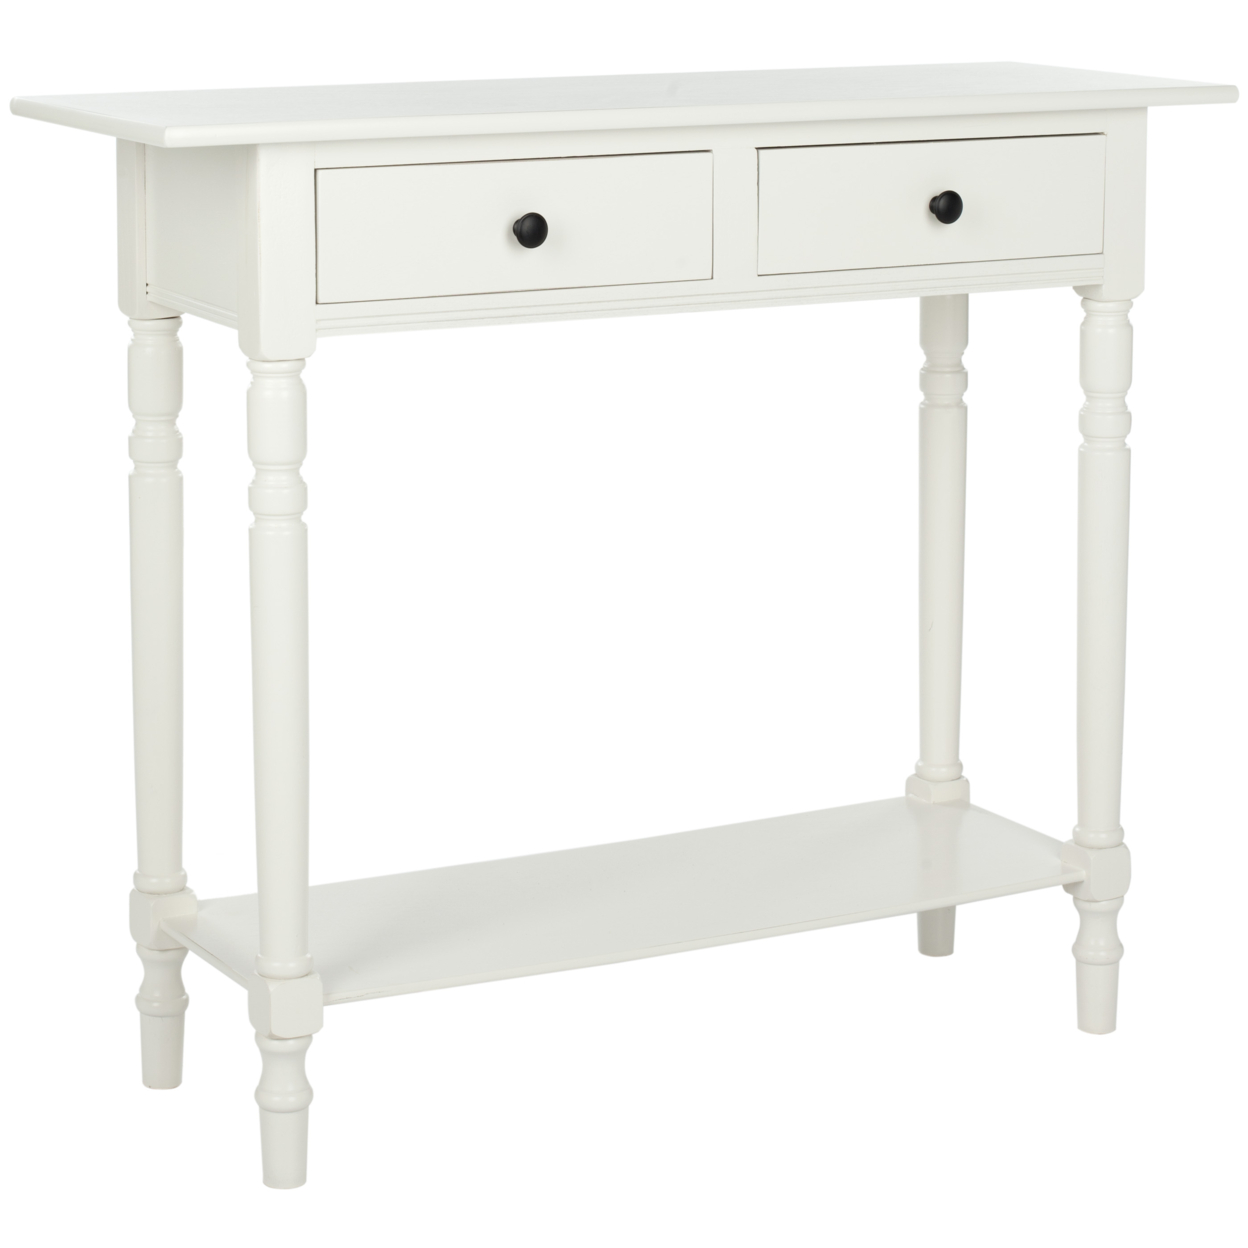 SAFAVIEH Rosemary 2-Drawer Console Table Distressed Cream